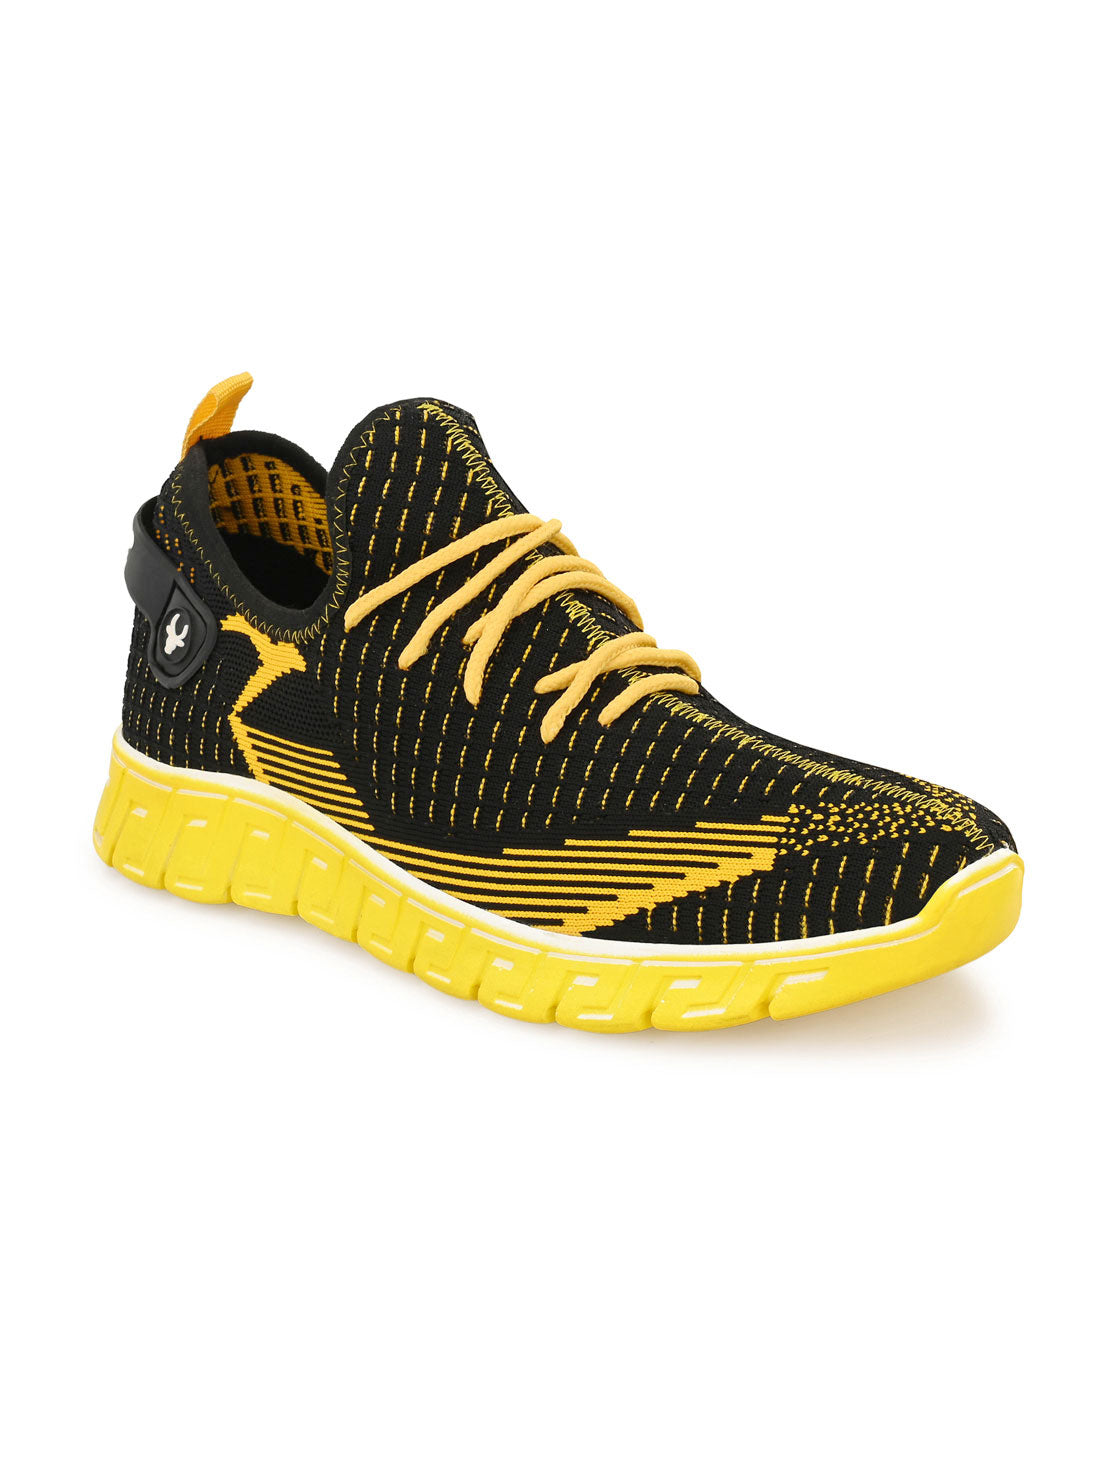 Hirolas® Men's Black/Yellow Knitted Athleisure Lace Up Sport Shoes (HRL2016BLY)